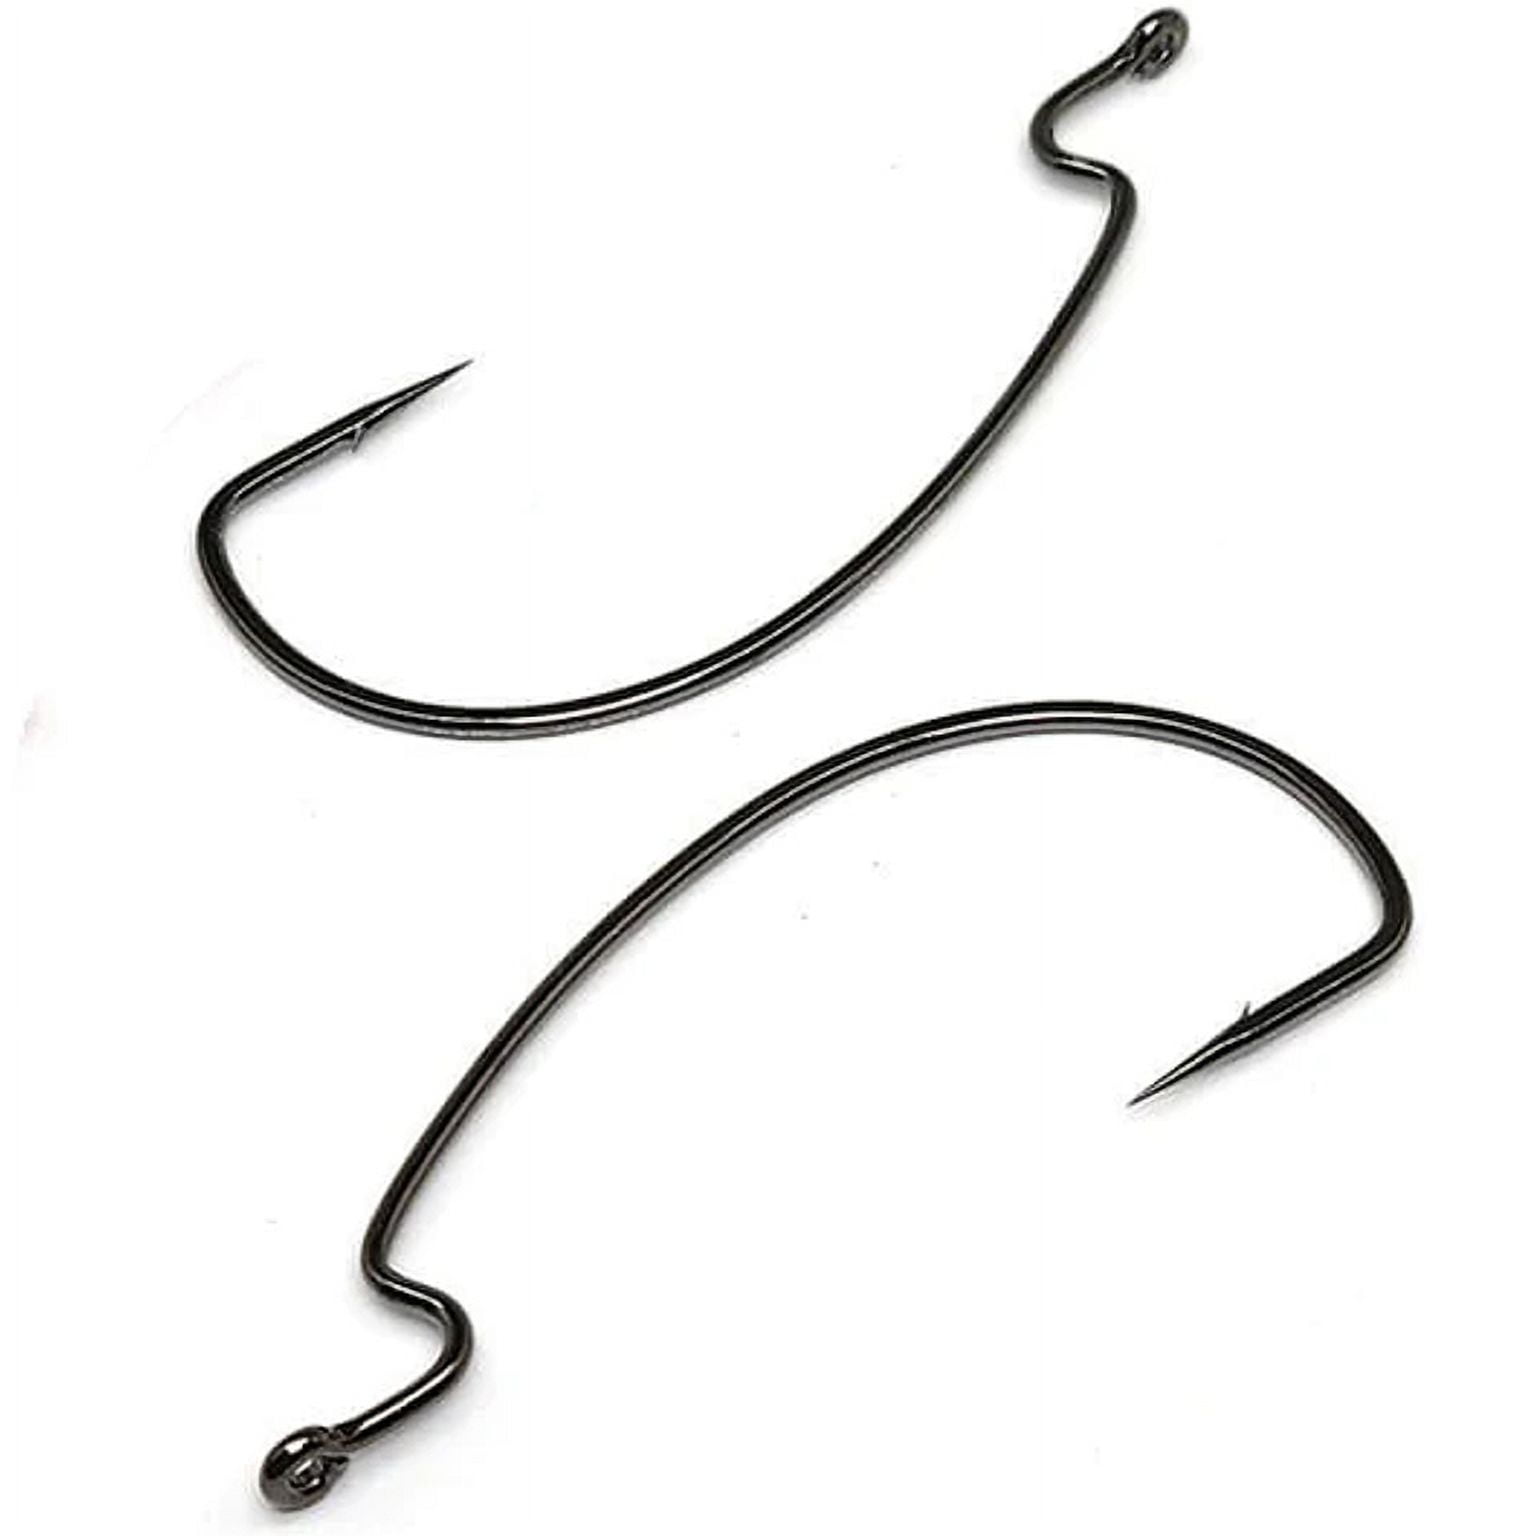 Gamakatsu Worm Offset EWG Hook in High Quality Carbon Steel, Size